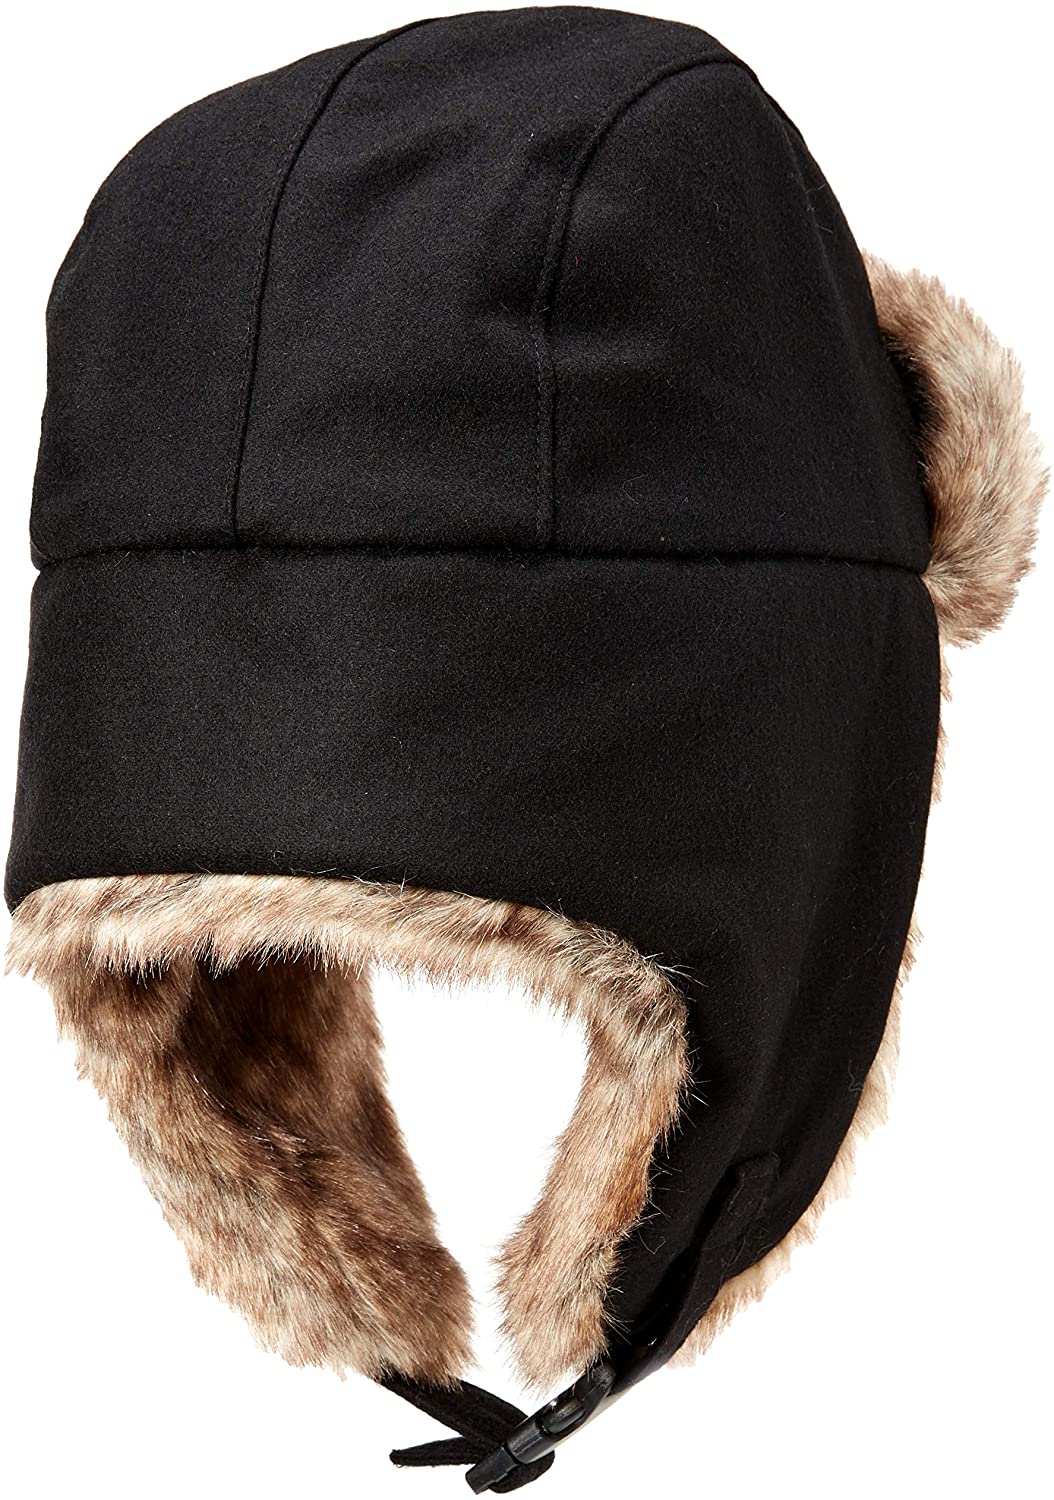 Essentials Mens Trapper Hat with Faux Fur Cold Weather Hat